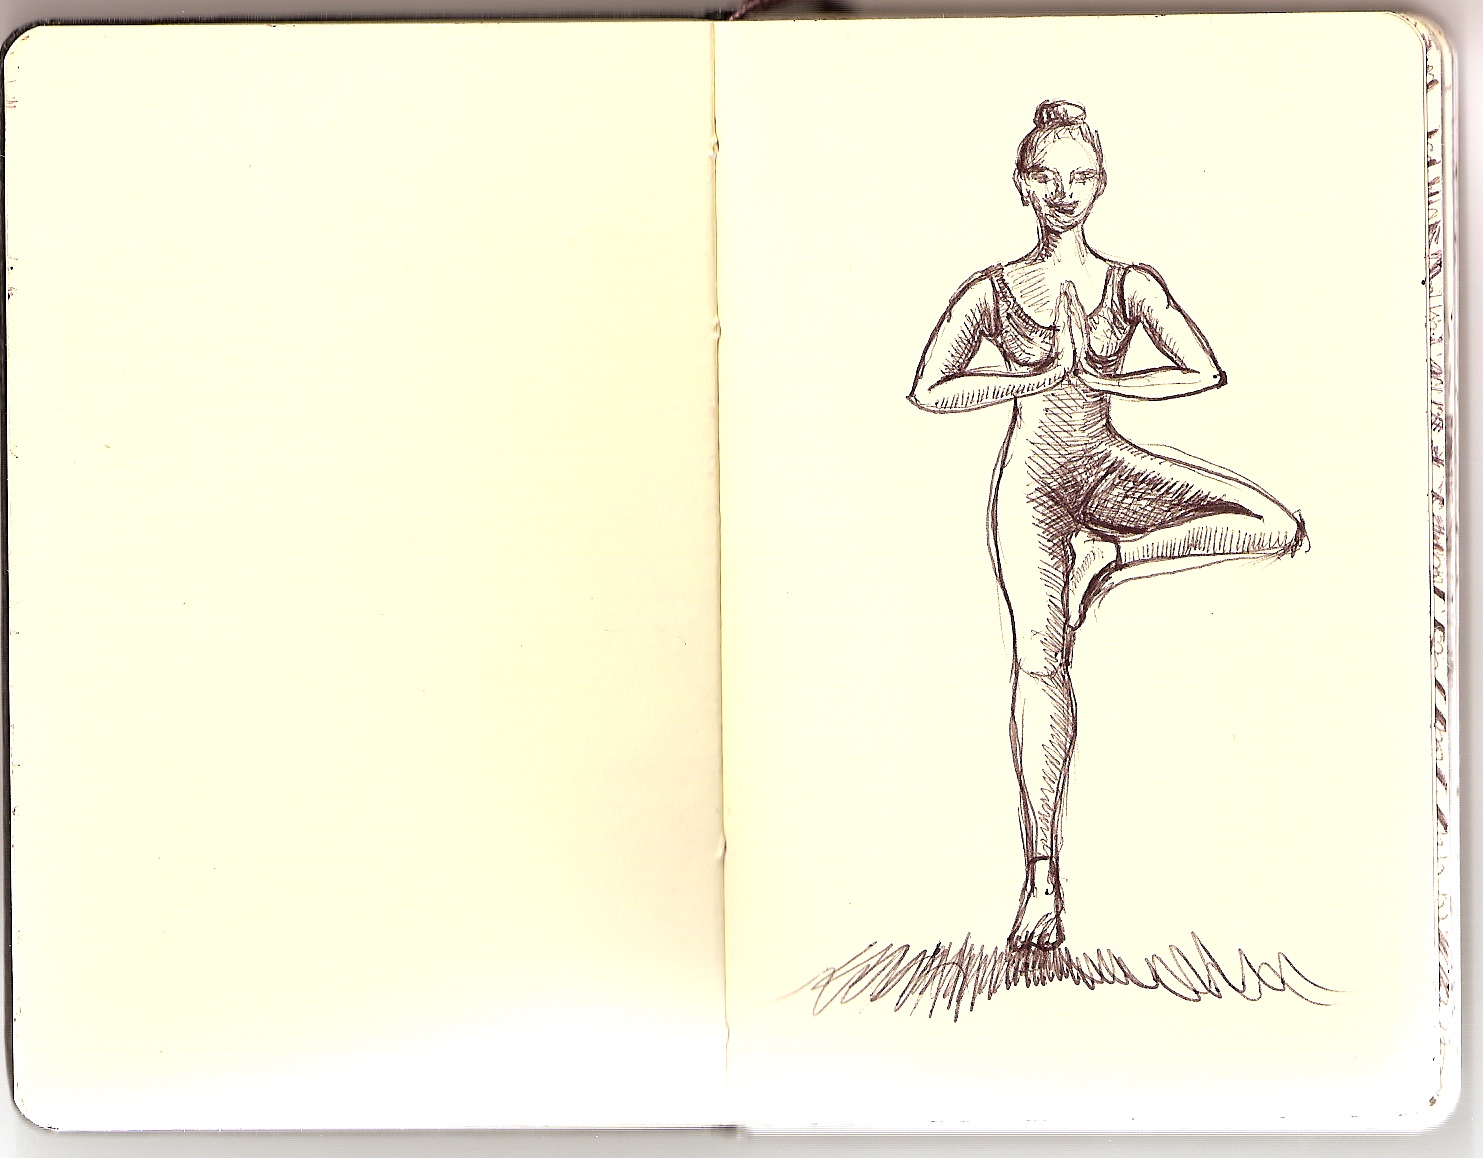 vikrasana, as the pose appears on the outside